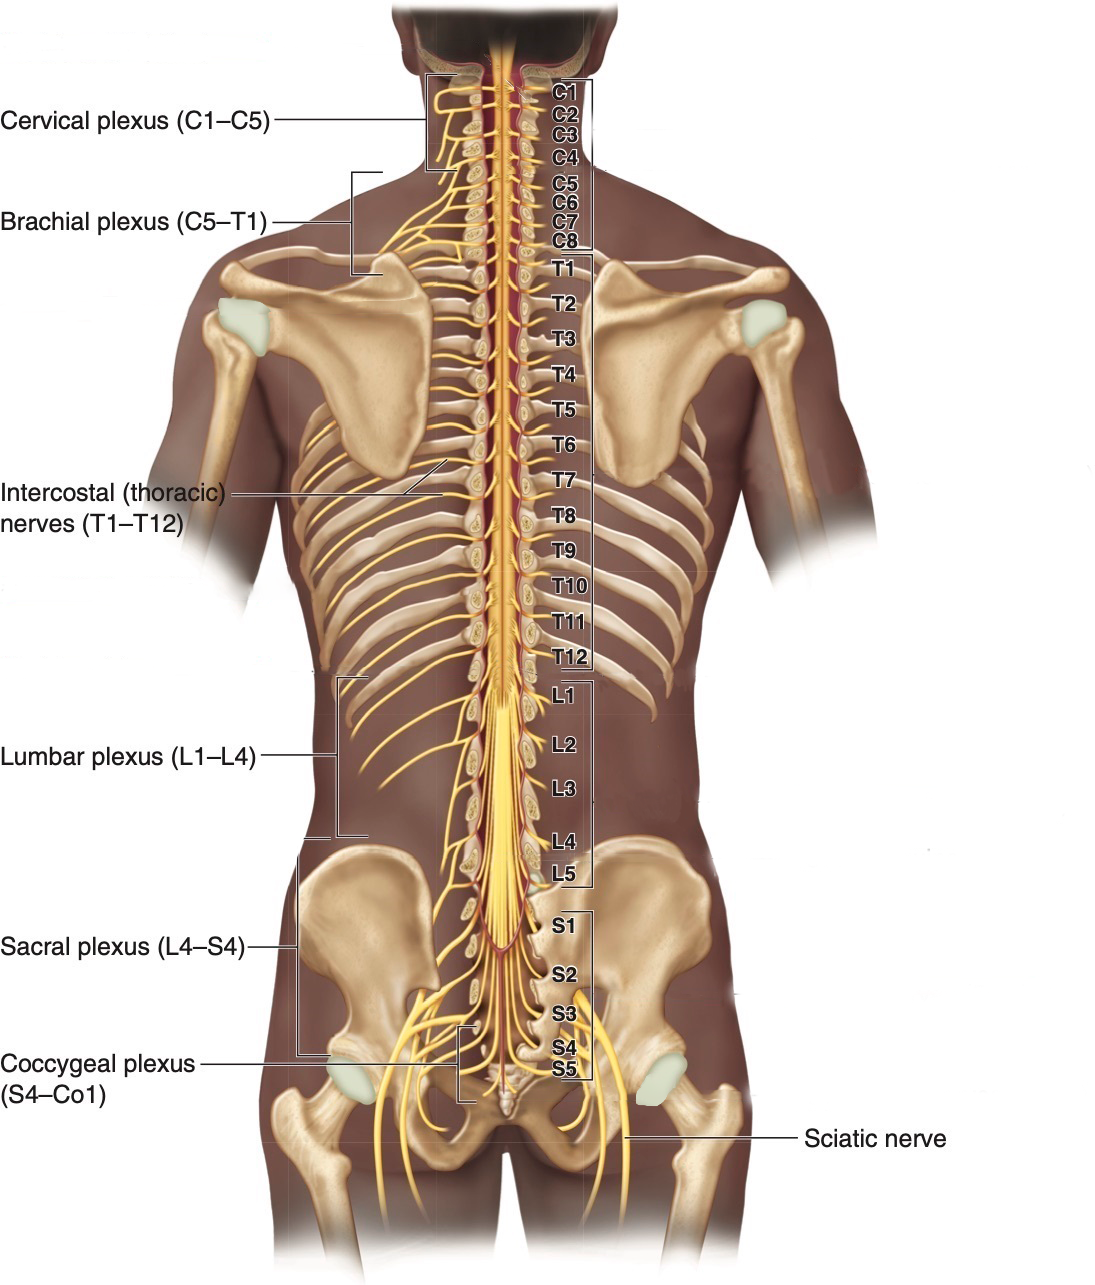 Spinal Cord and Plexi REF (1).png